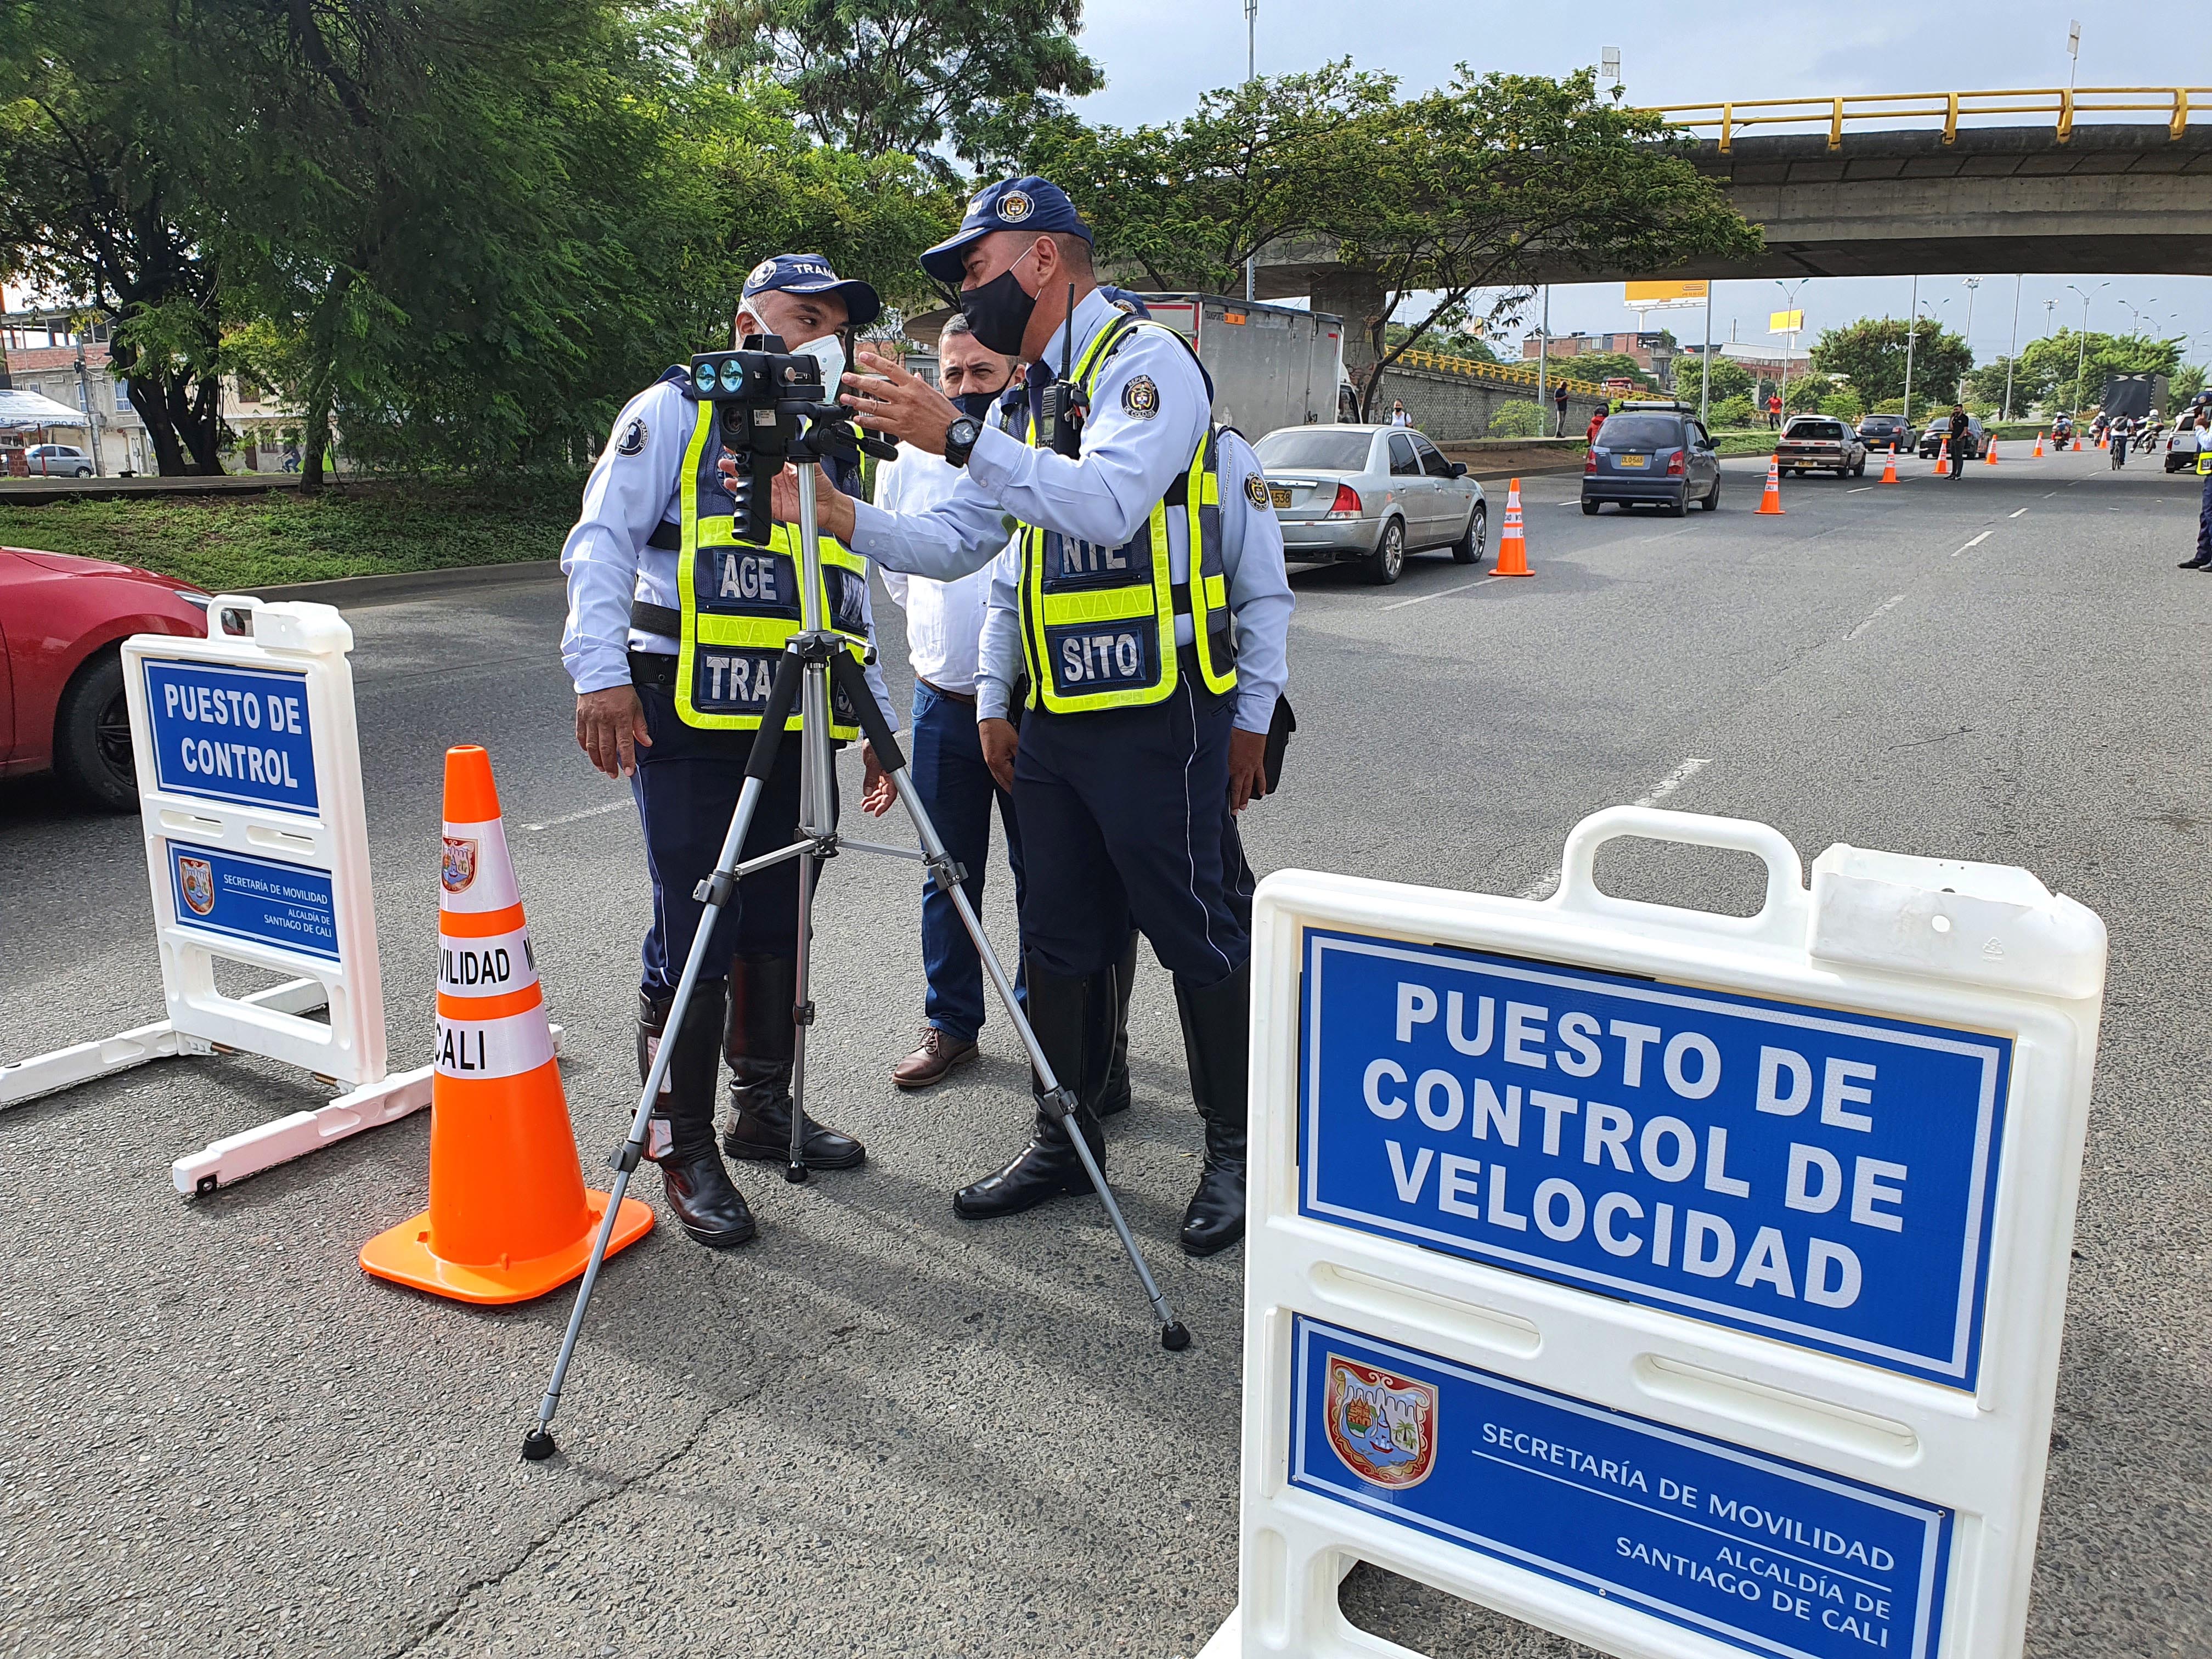 Three officers supporting national road safety law in Colombia